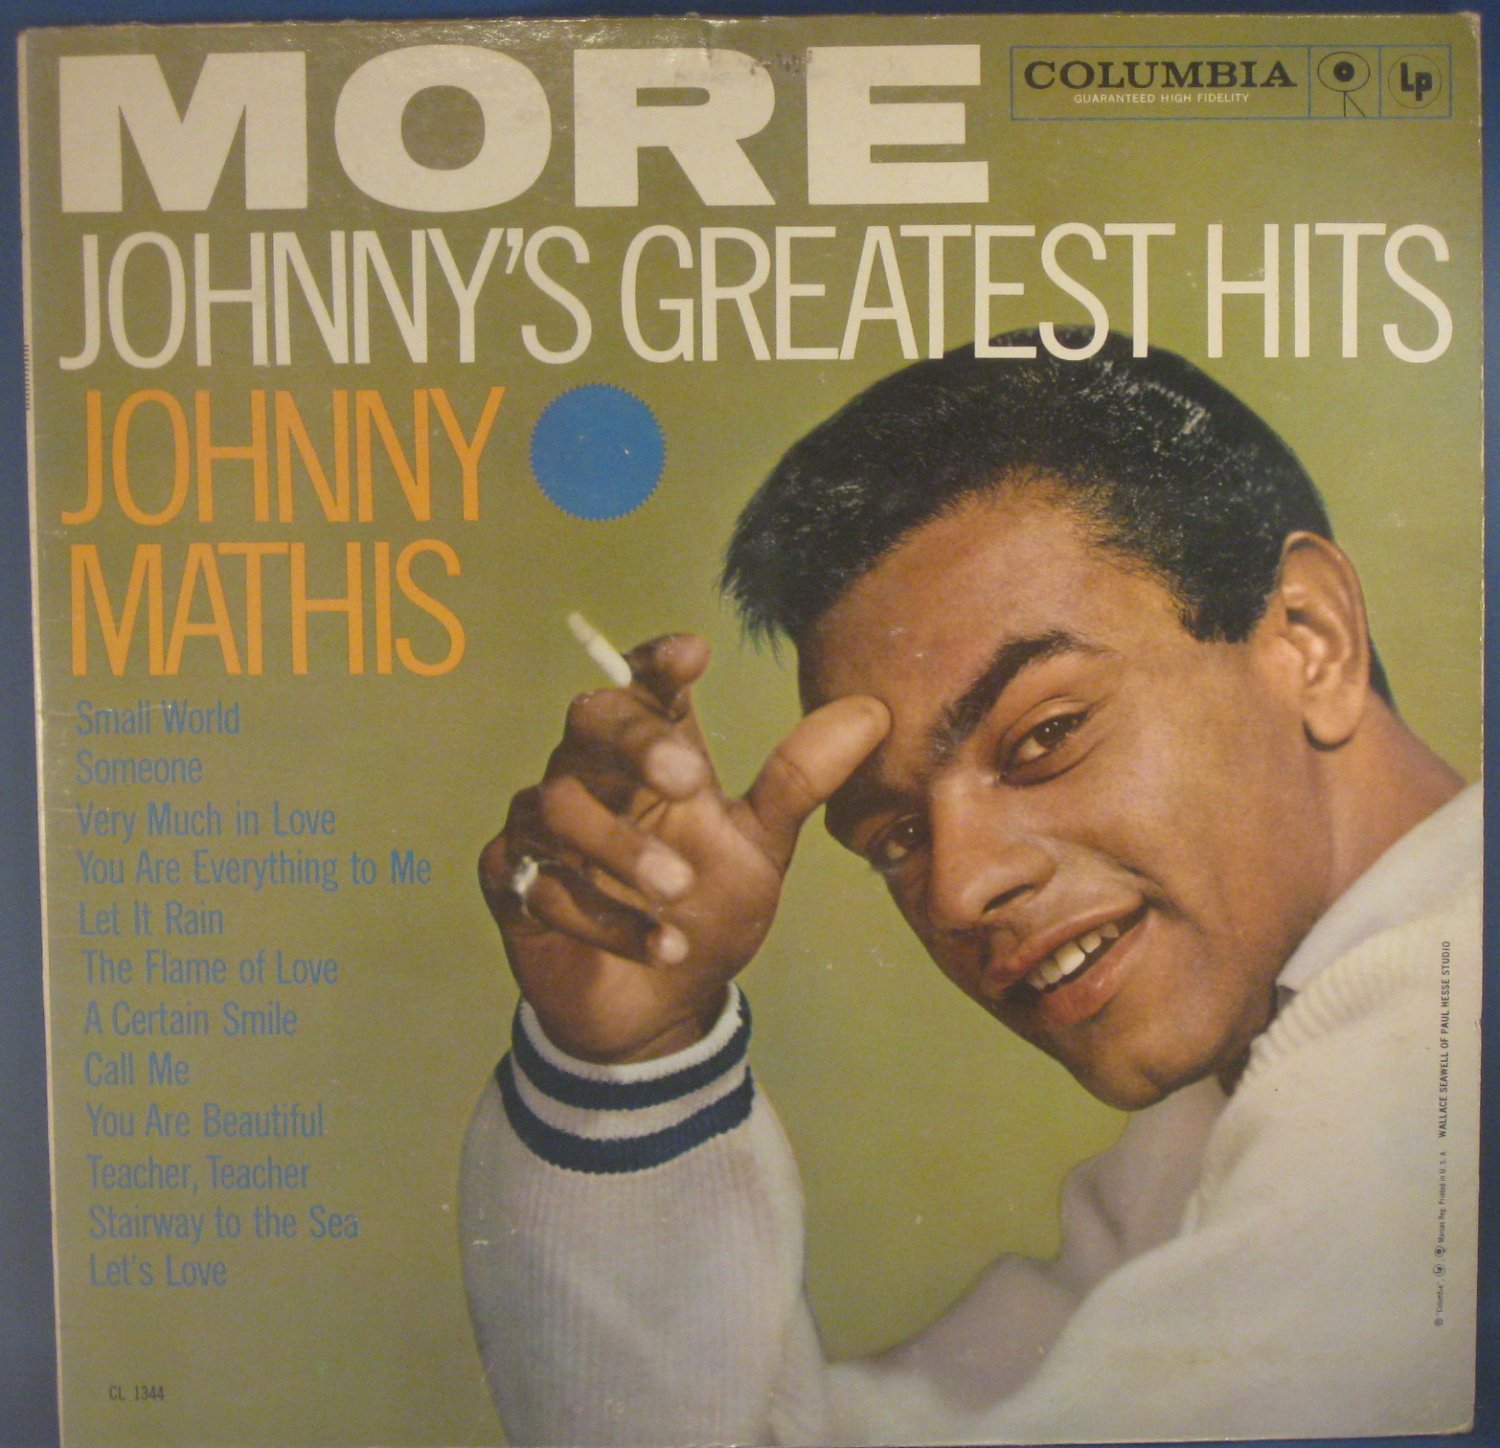 MORE JOHNNY'S GREATEST HITS - Johnny Mathis Vinyl LP